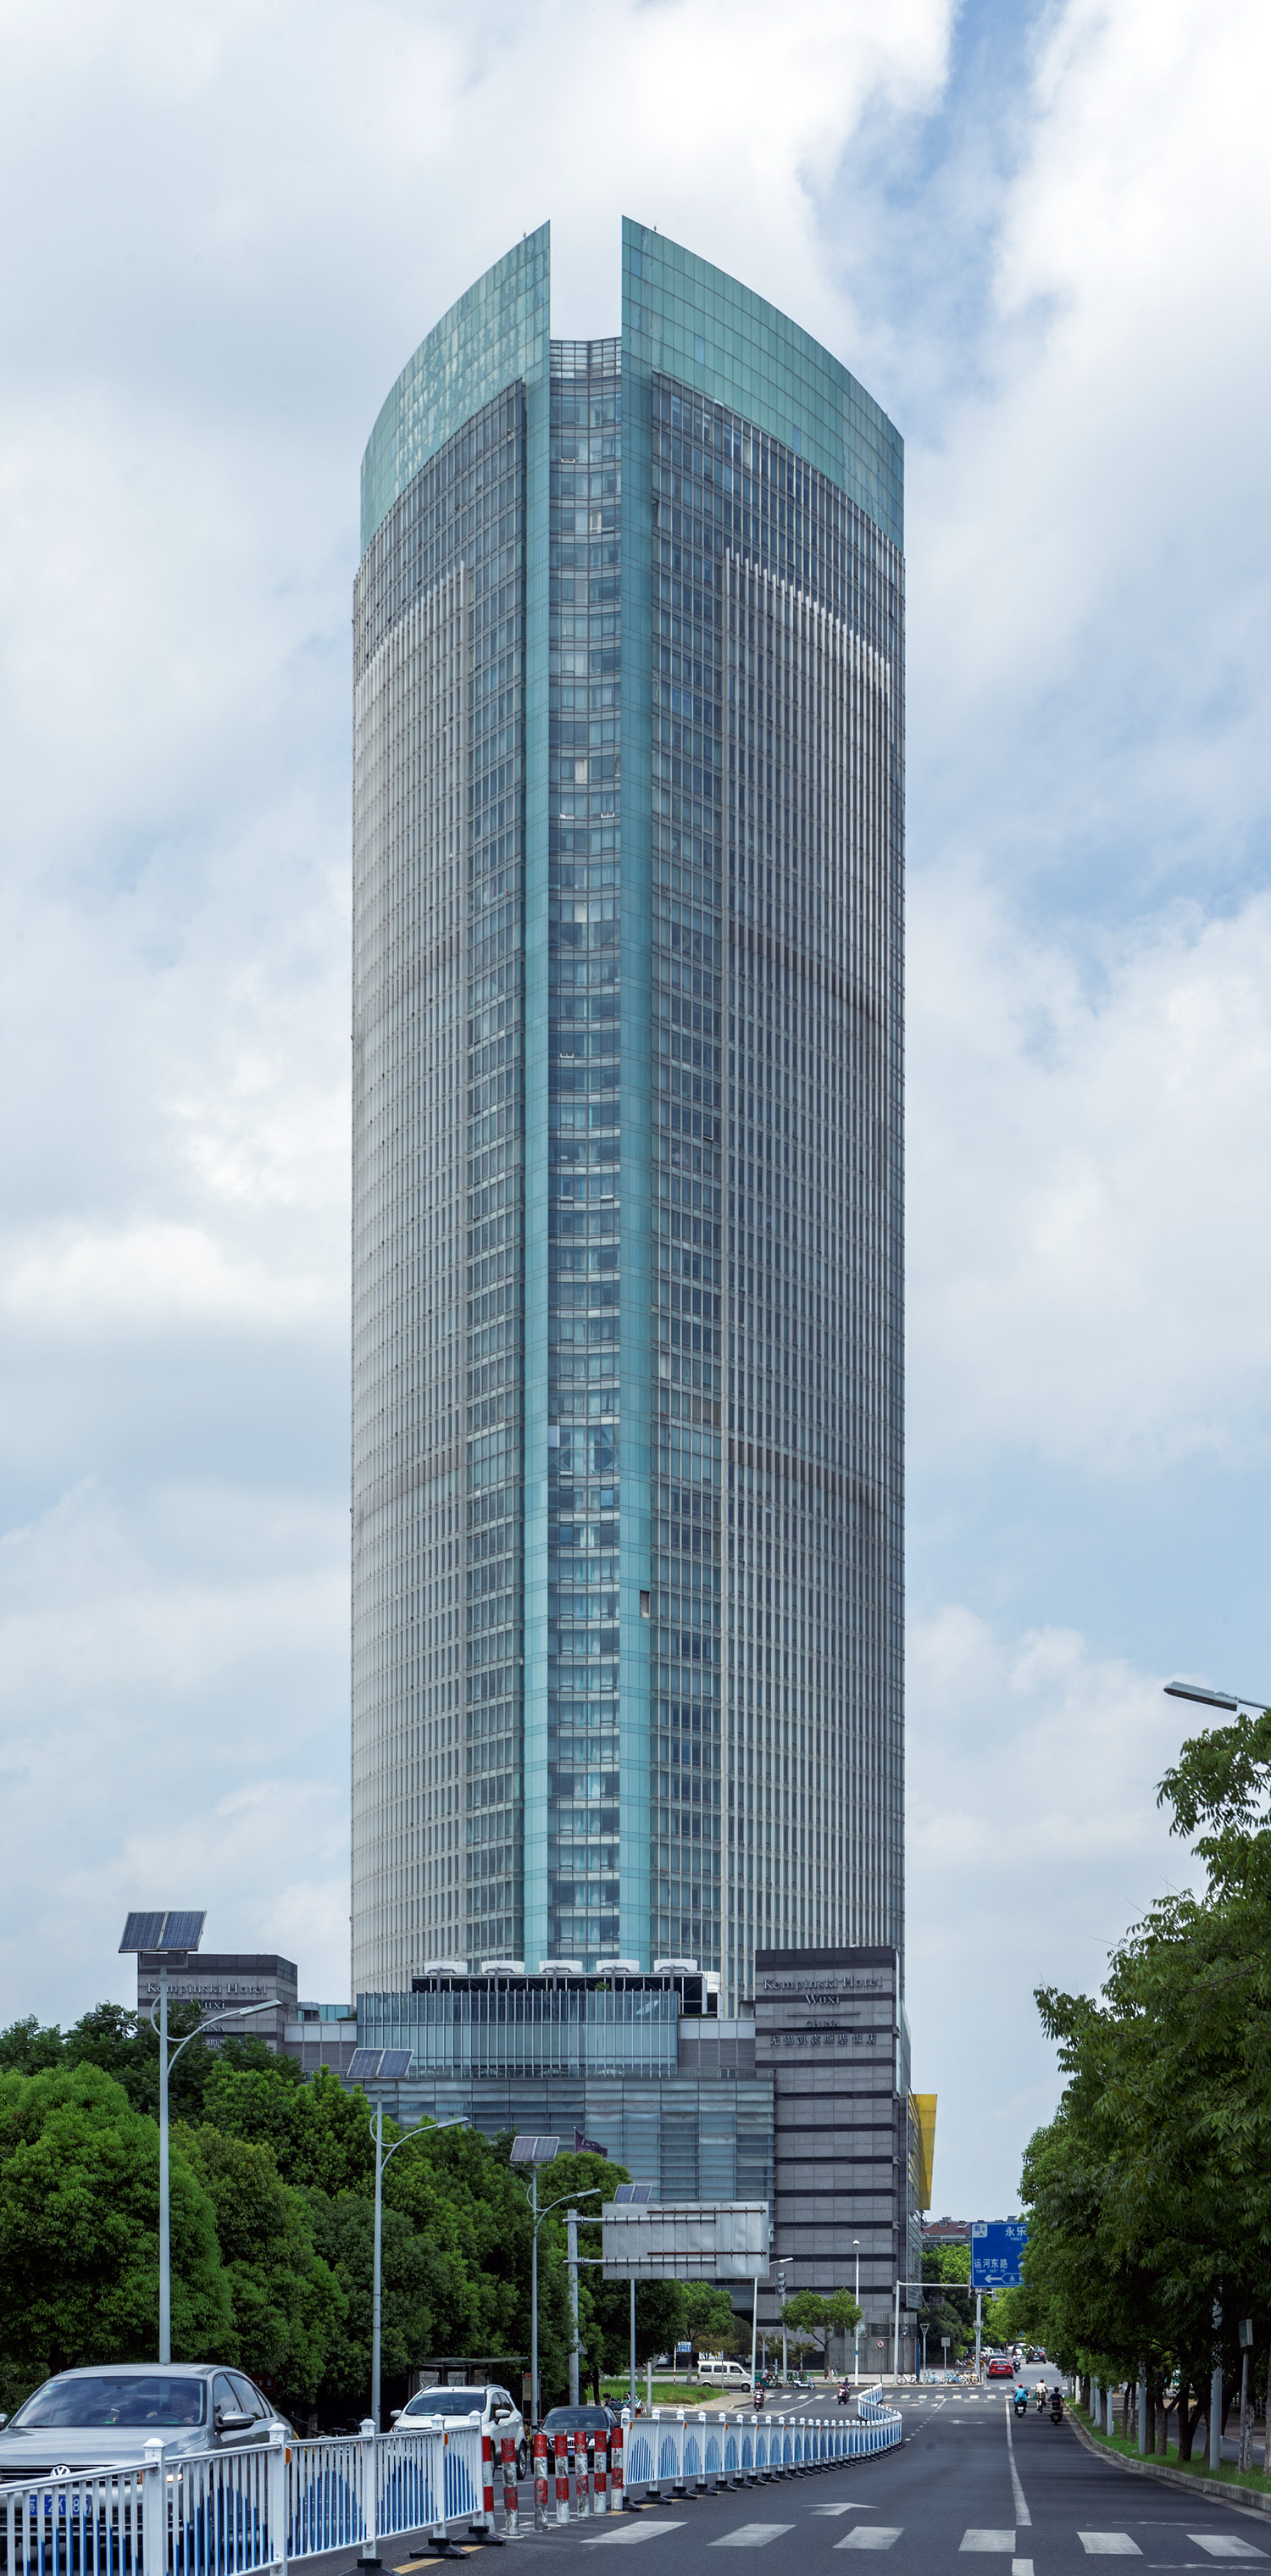 Crowne Plaza Wuxi City Center, Wuxi - View from the southeast. © Mathias Beinling